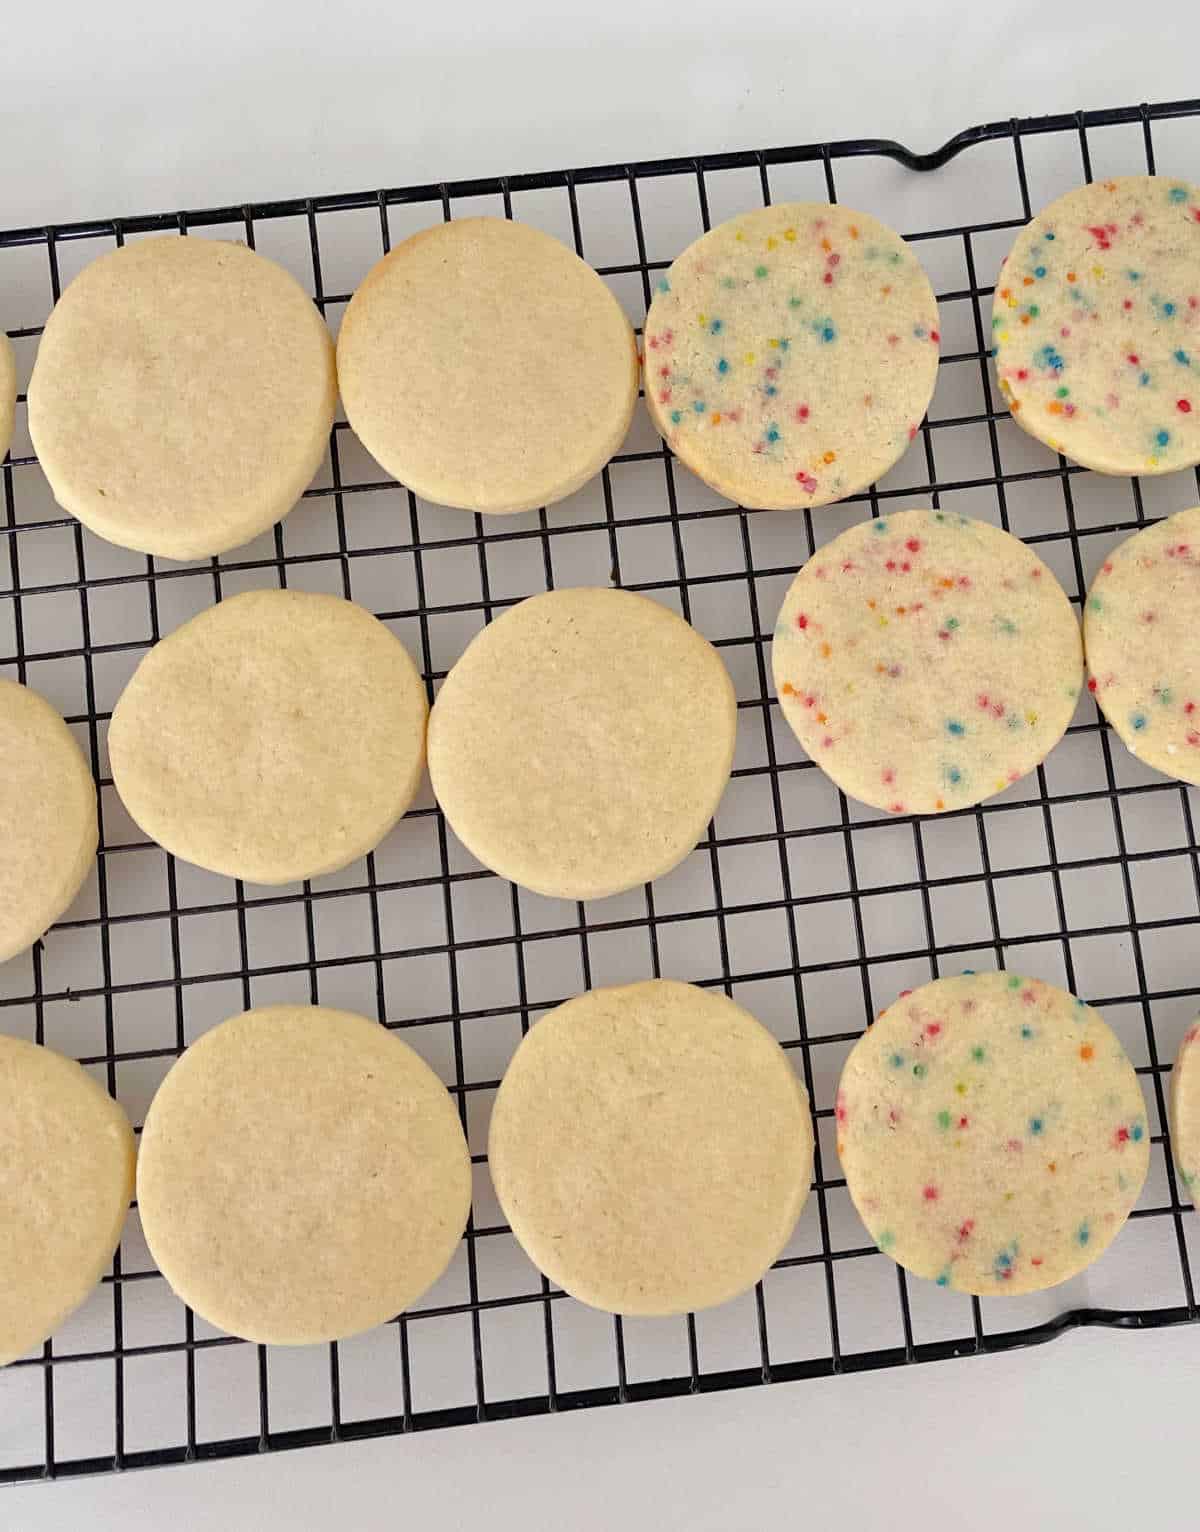 Sugar Cookies sitting on a wire baking rack.